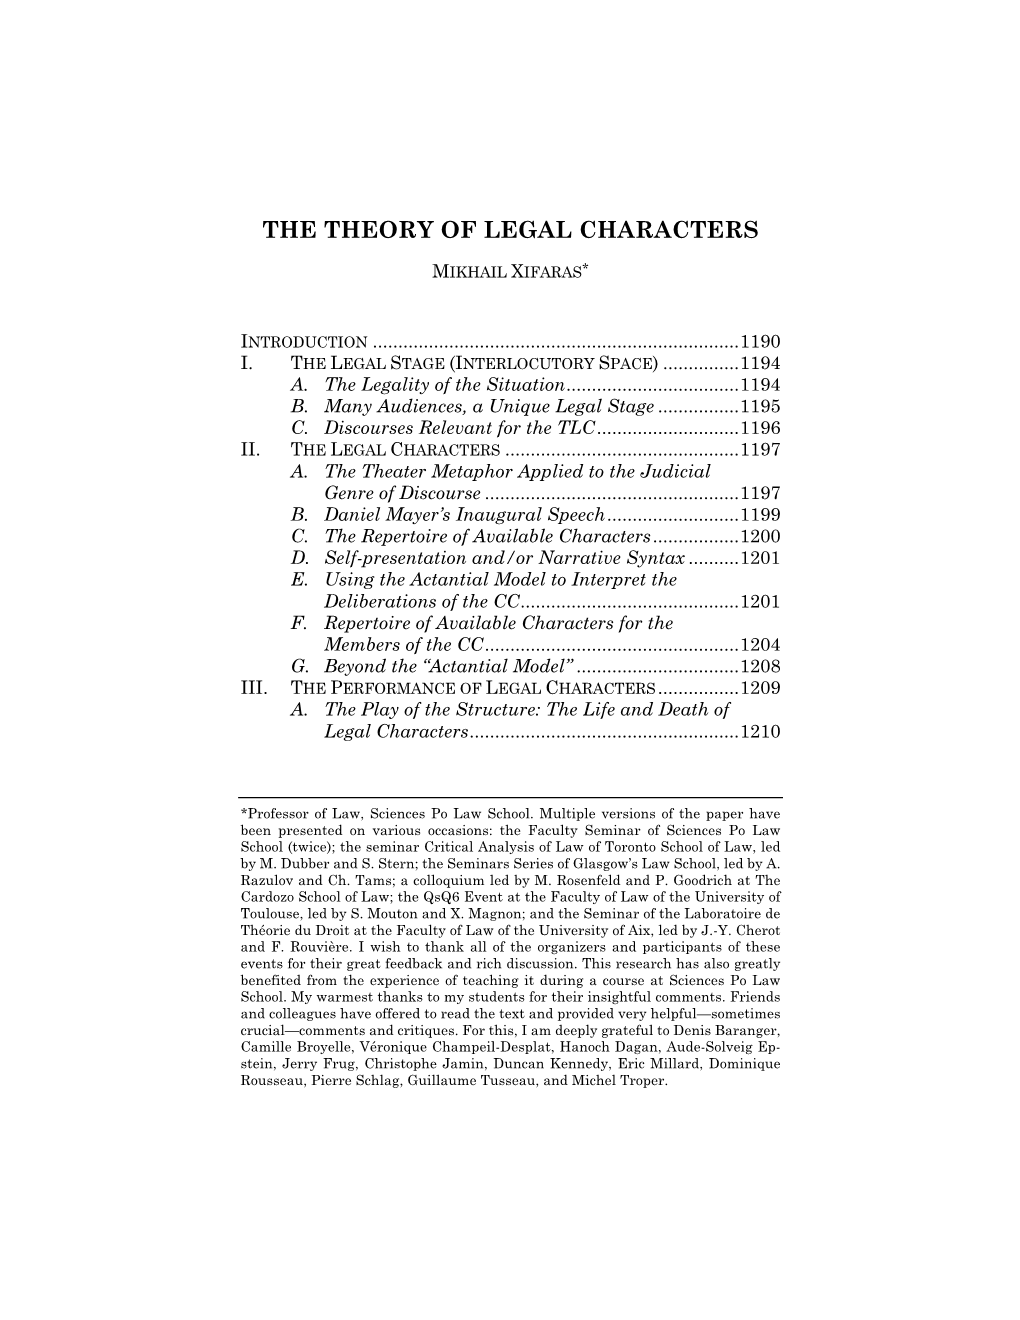 Xifaras, Theory of Legal Characters